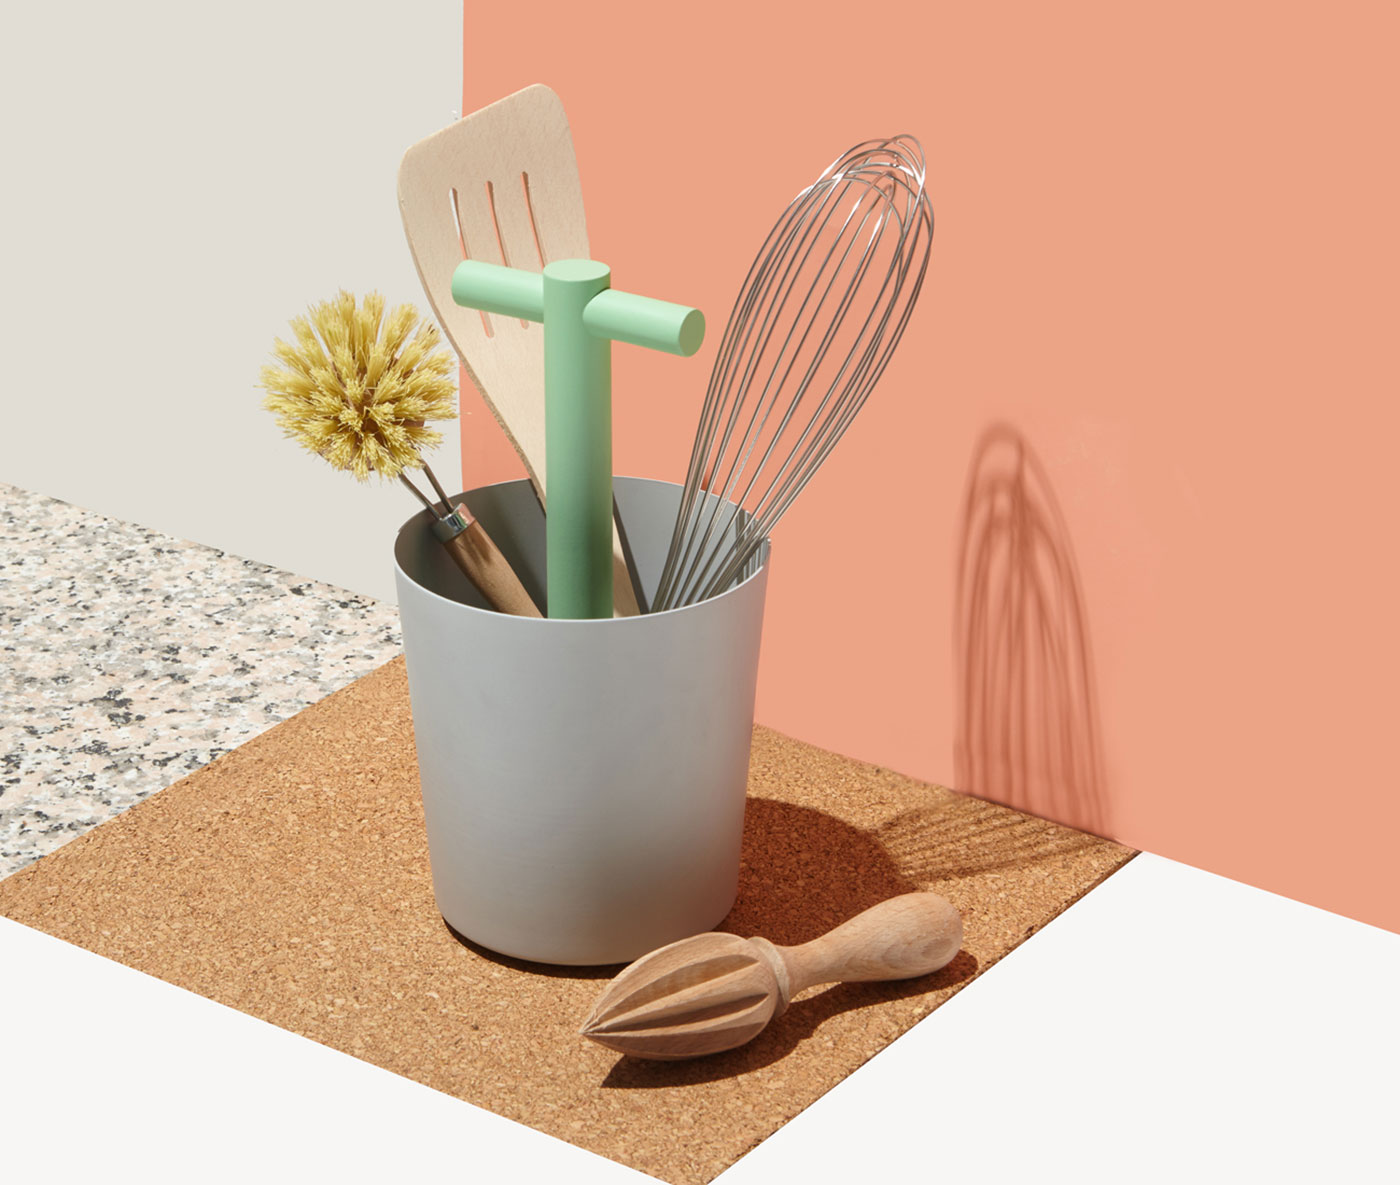 Accessories by New York housewares brand Good Thing